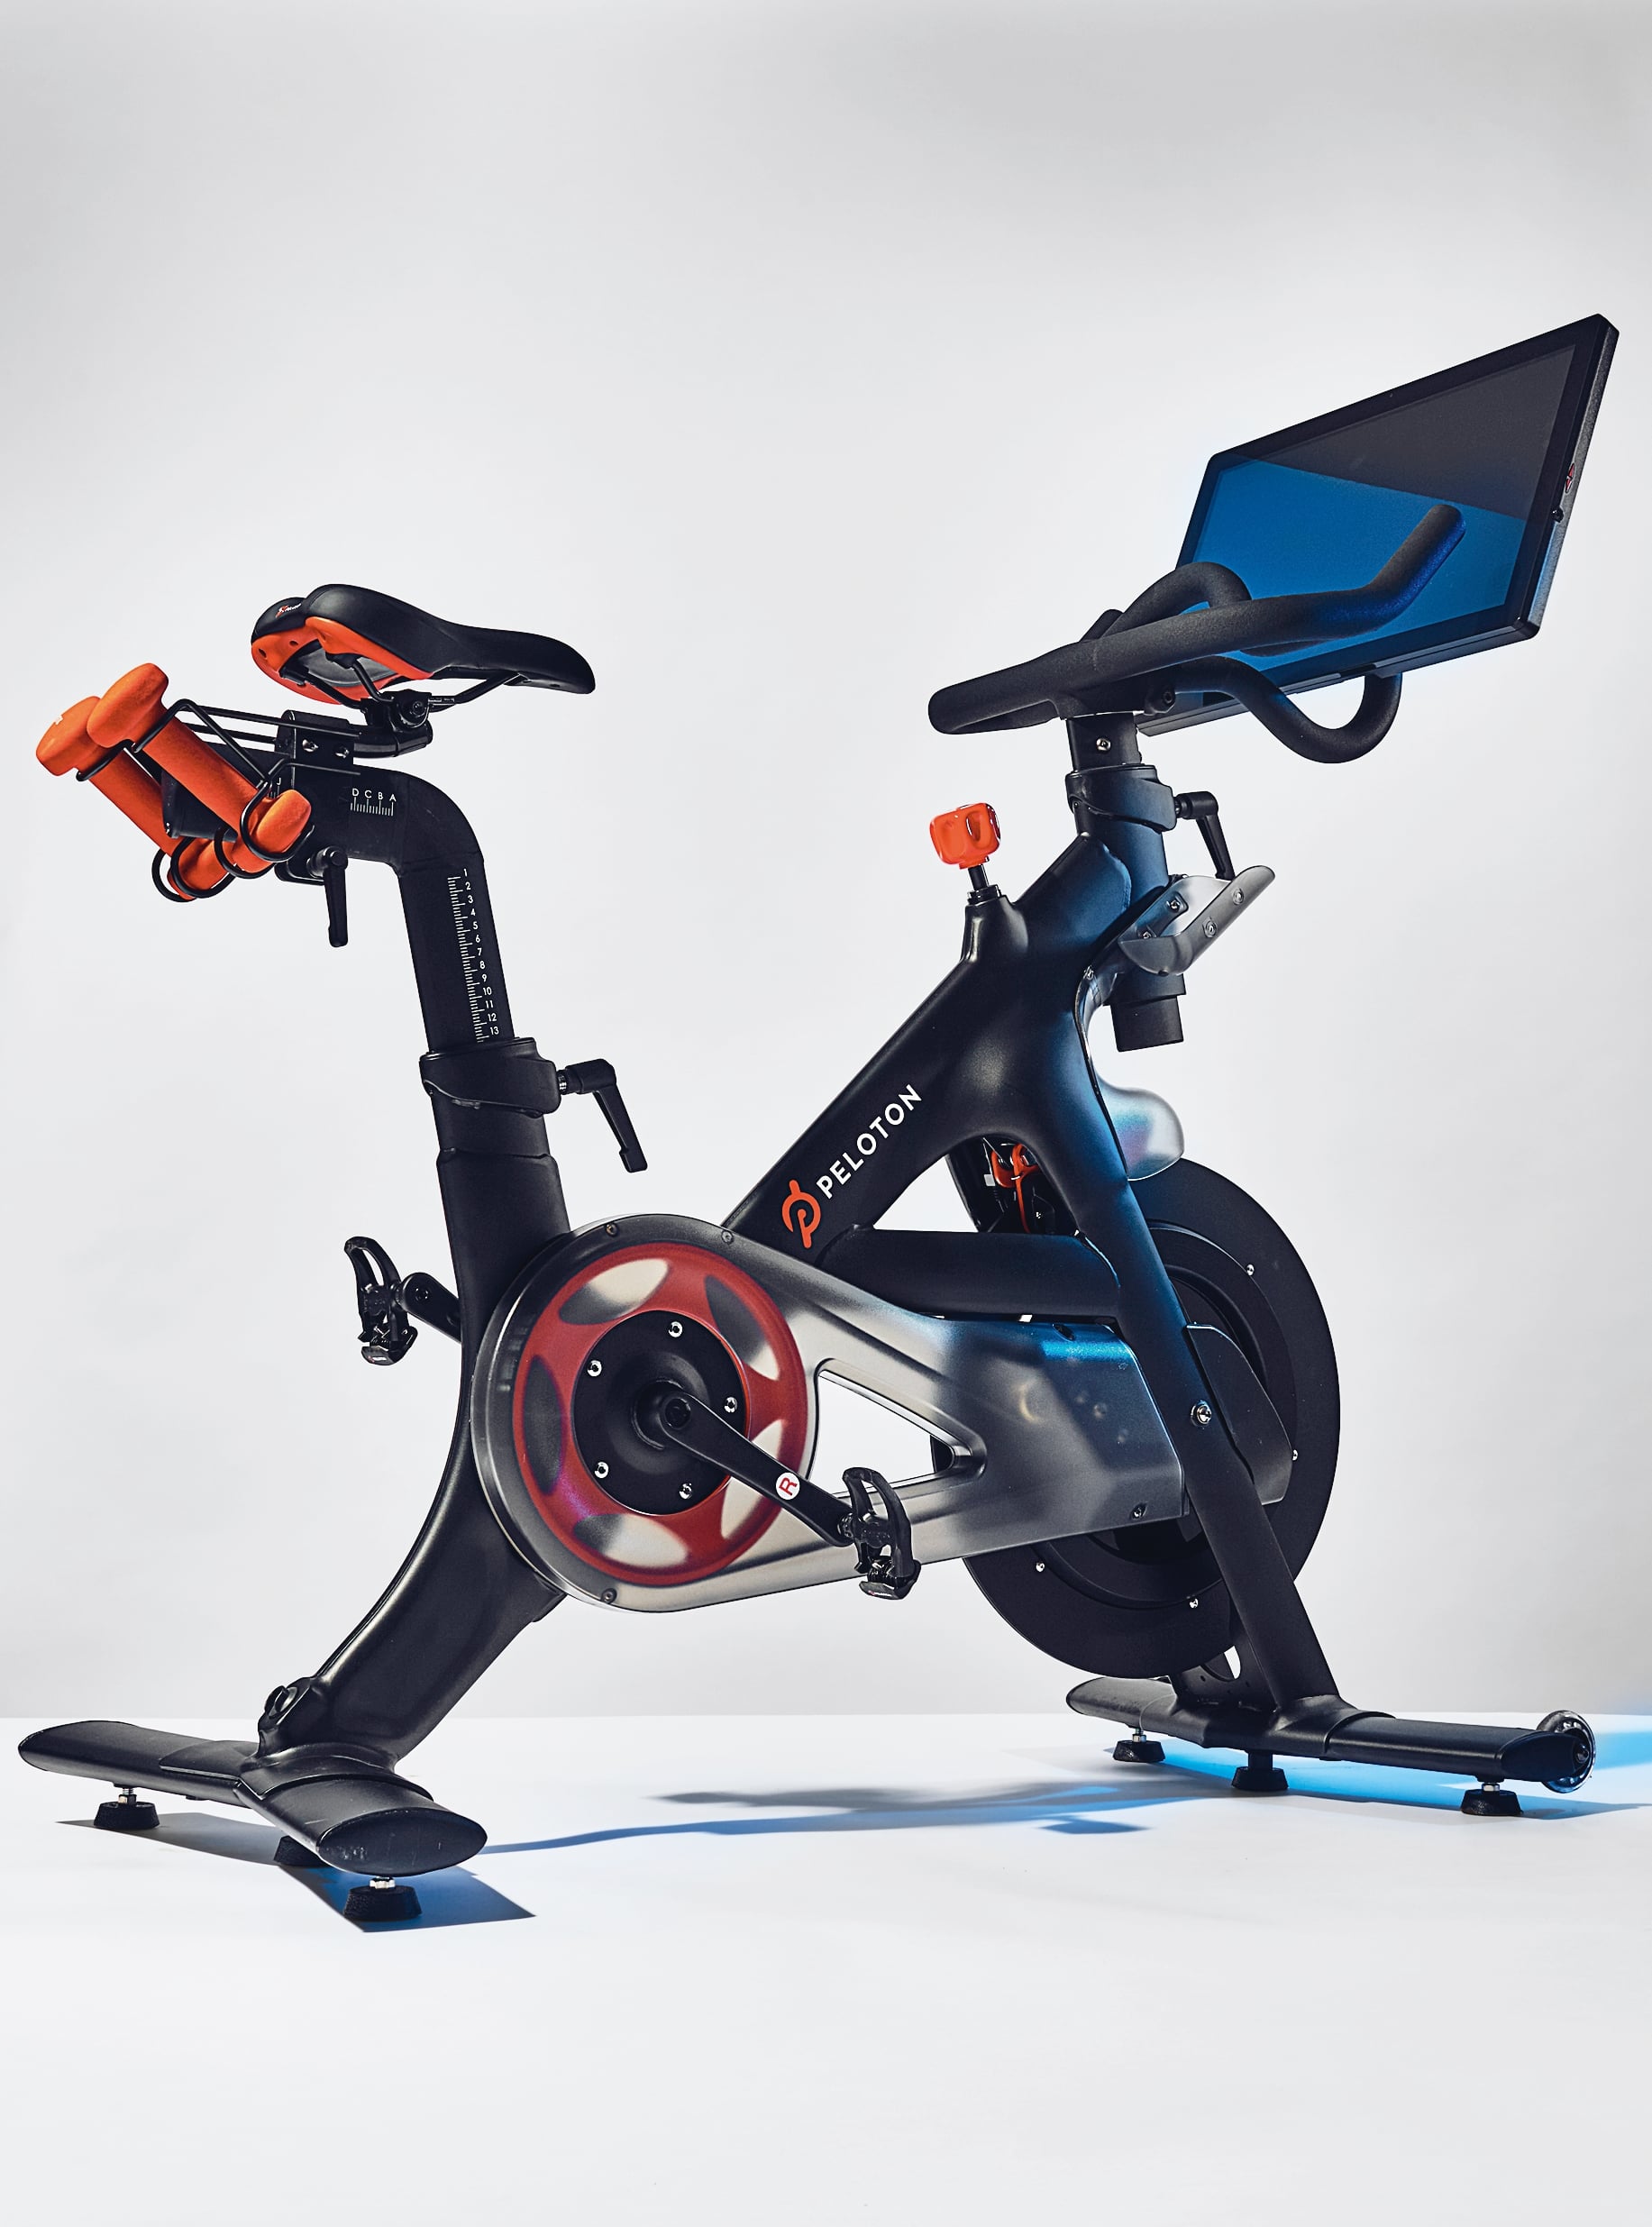 Peloton stationary exercise bicycle. (Photo by Adrian Gaut/Condé Nast via Getty Images)